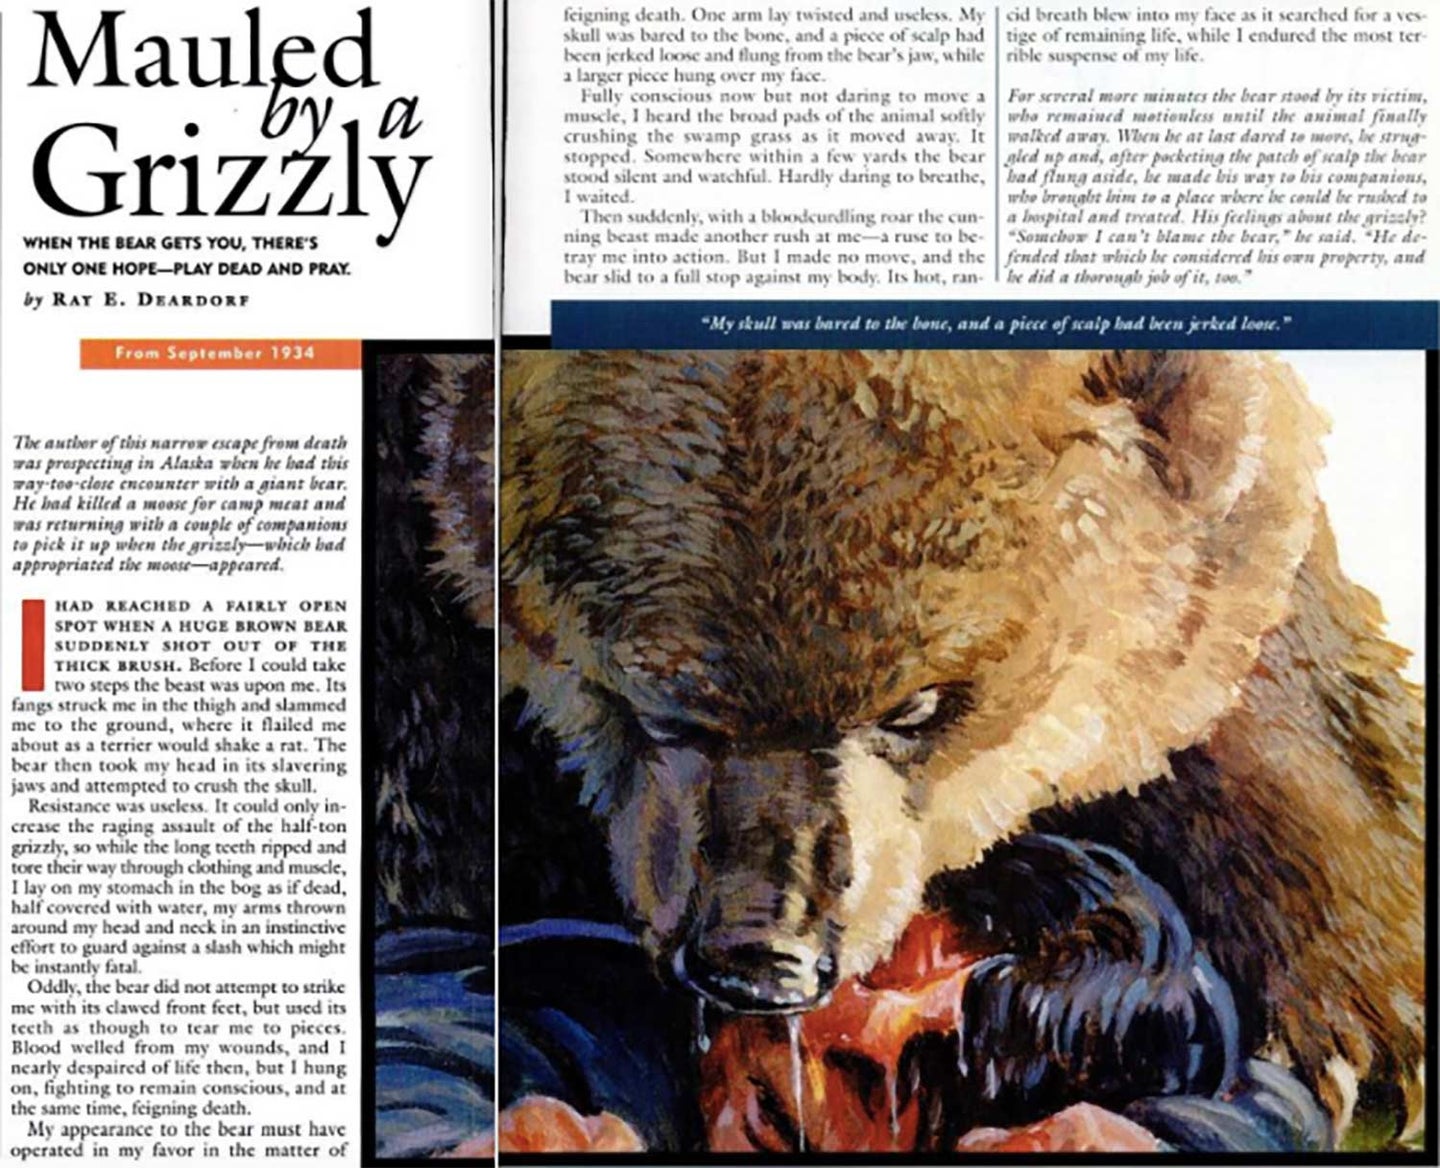 A magazine clipping from Field & stream showing a grizzly bear mauling